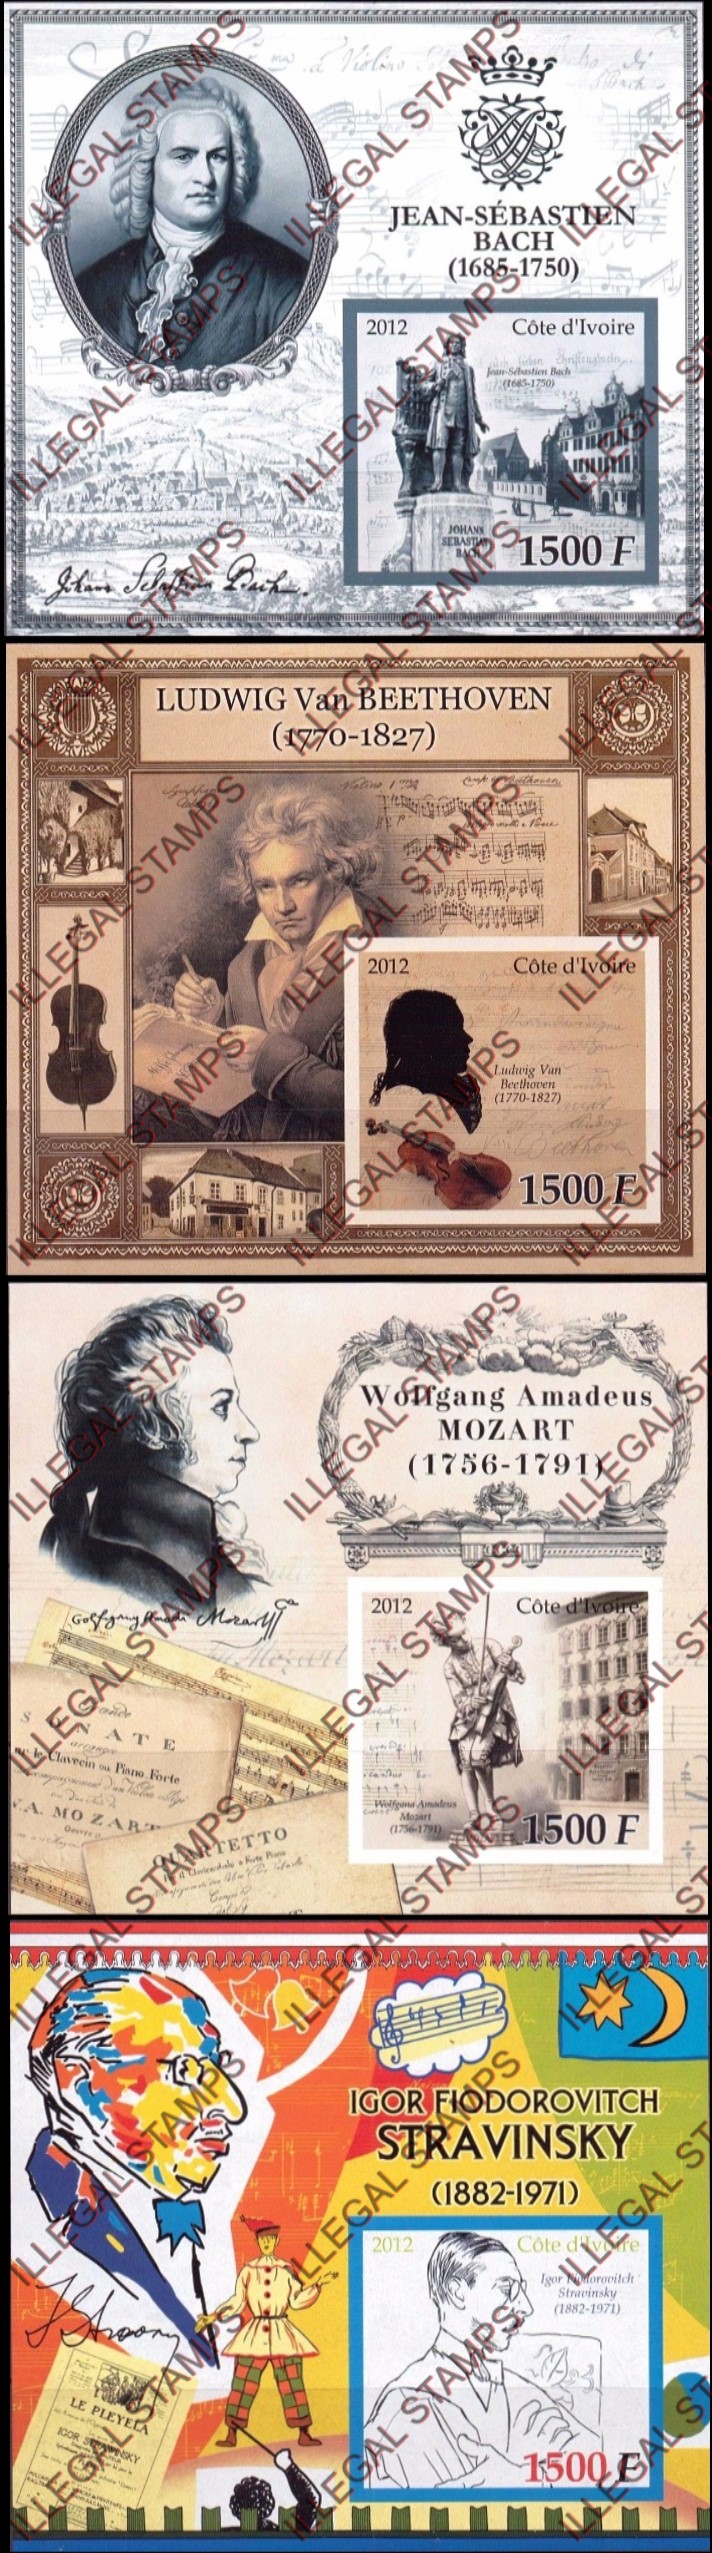 Ivory Coast 2012 Composers Bach, Beethoven, Mozart, Stravinsky Illegal Stamp Souvenir Sheets of 4